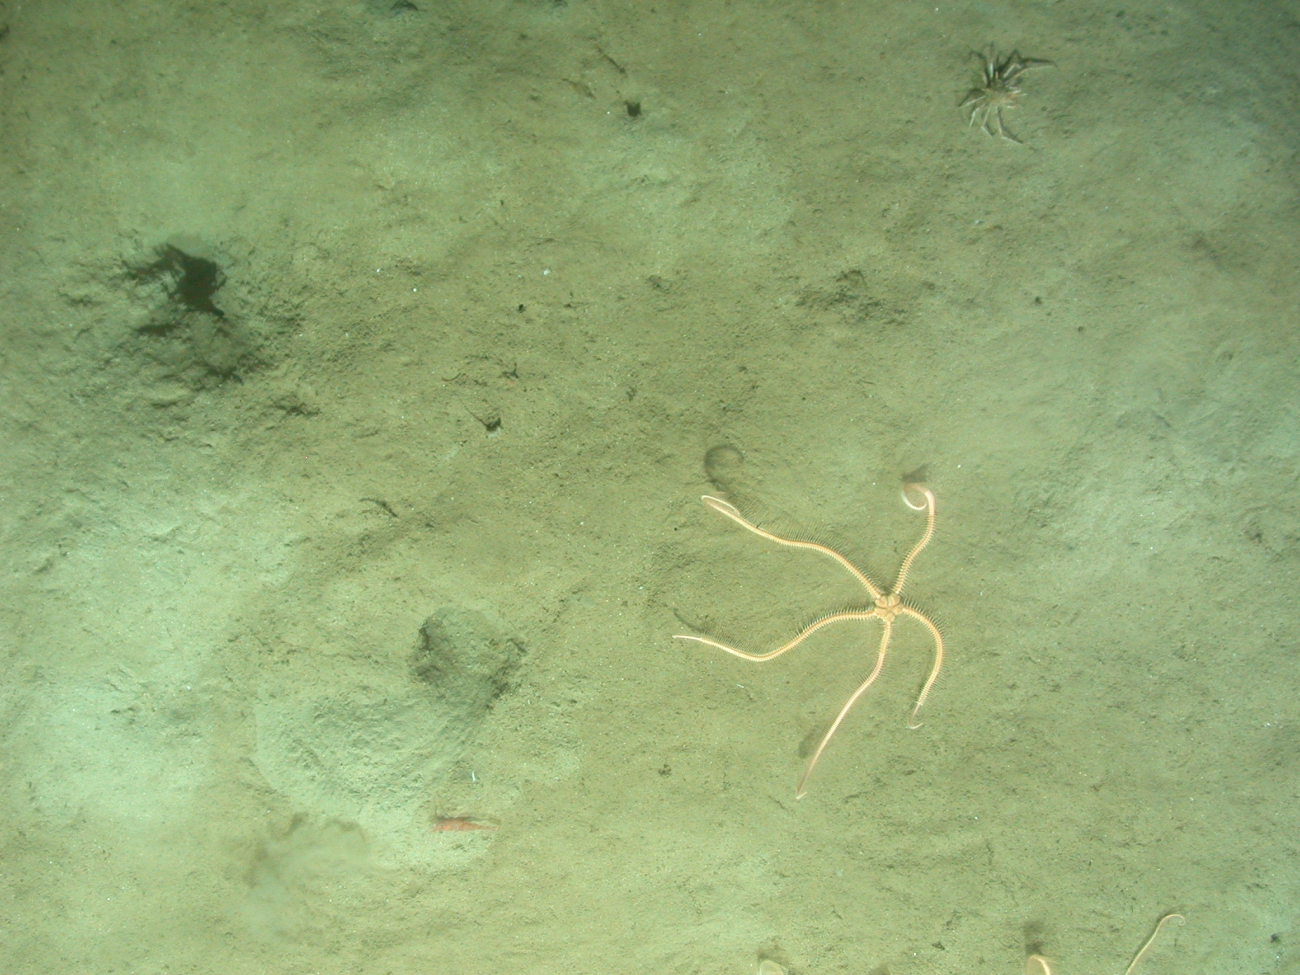 A crab, shrimp, and brittle star with arms extended upward on a mud substrate